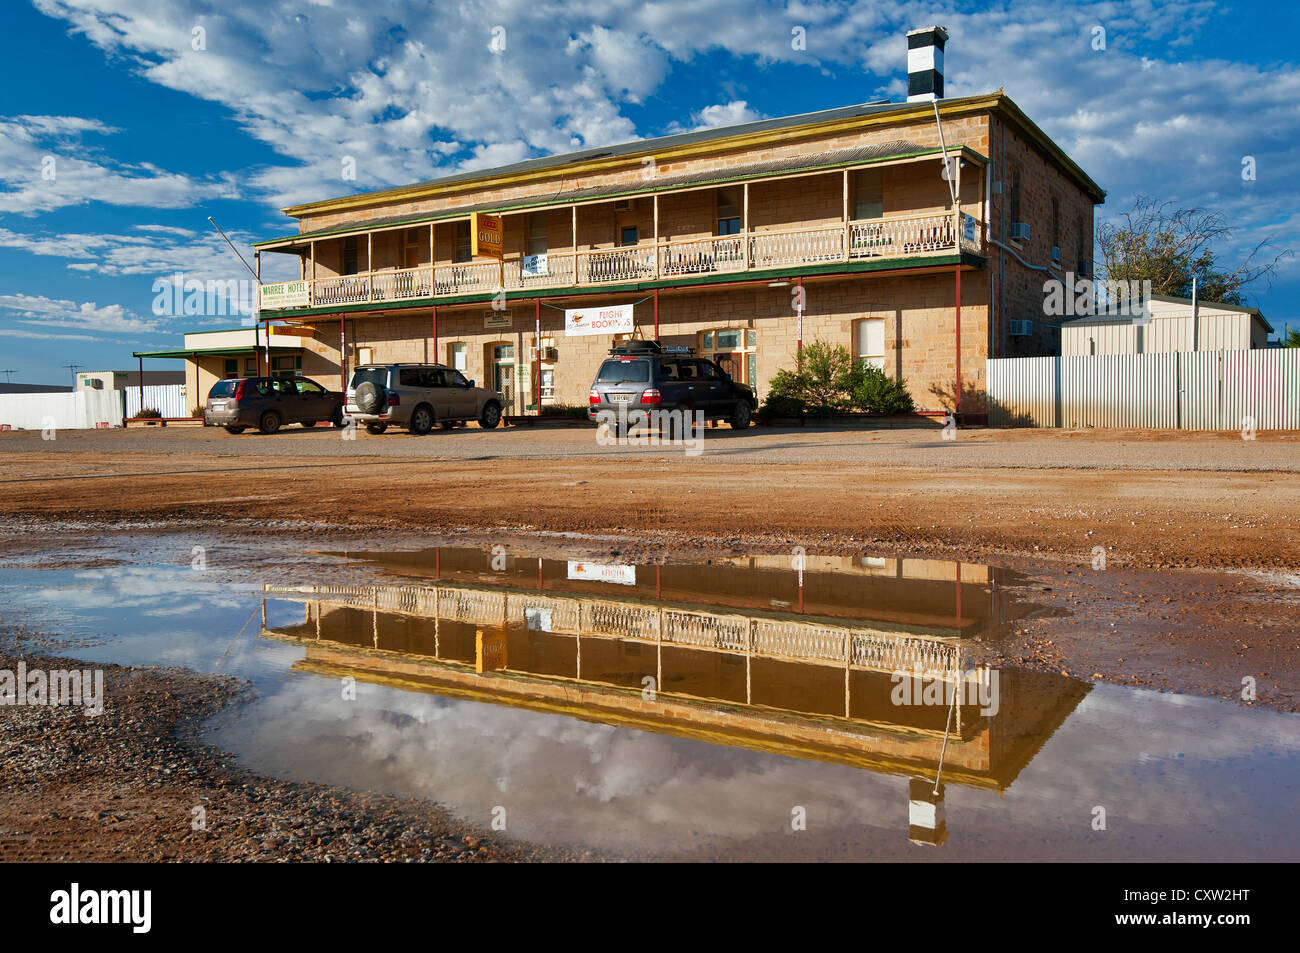 Reflections of remote Marree Hotel in the desert of South Australia. Stock Photo